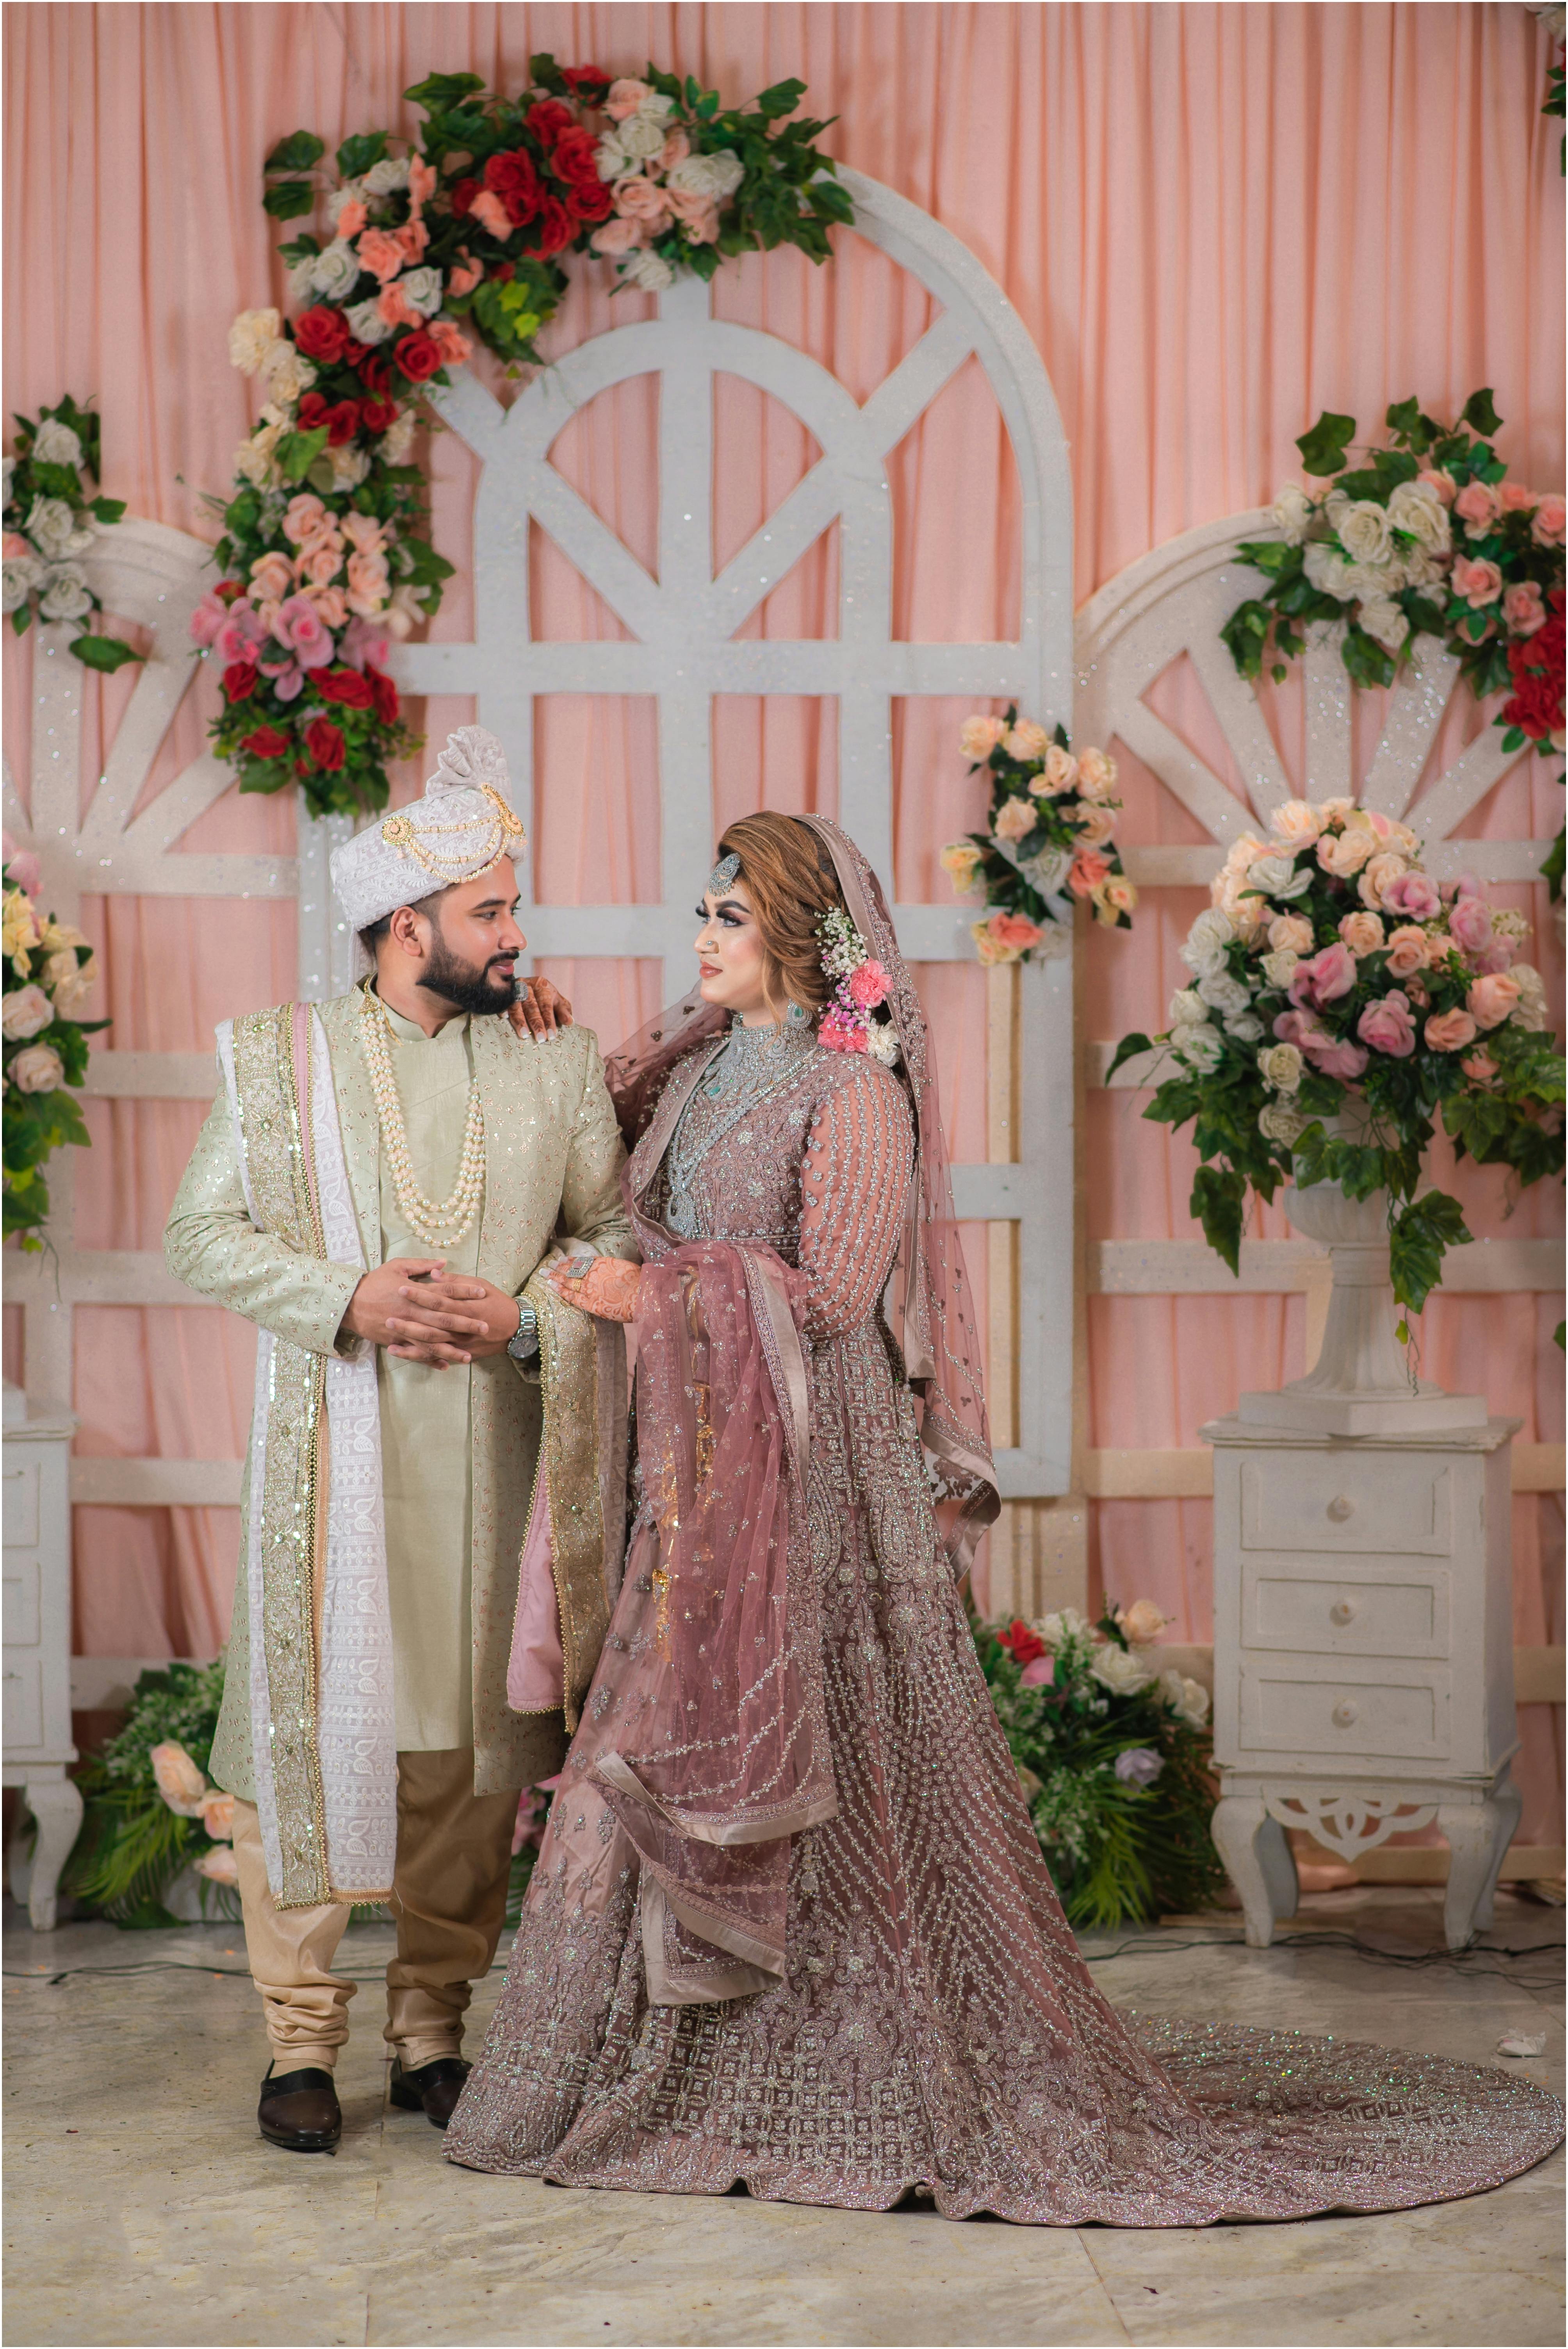 The Most Dazzling Pakistani Bridal Suits That We Saw Recently On Instagram  | WeddingBazaar